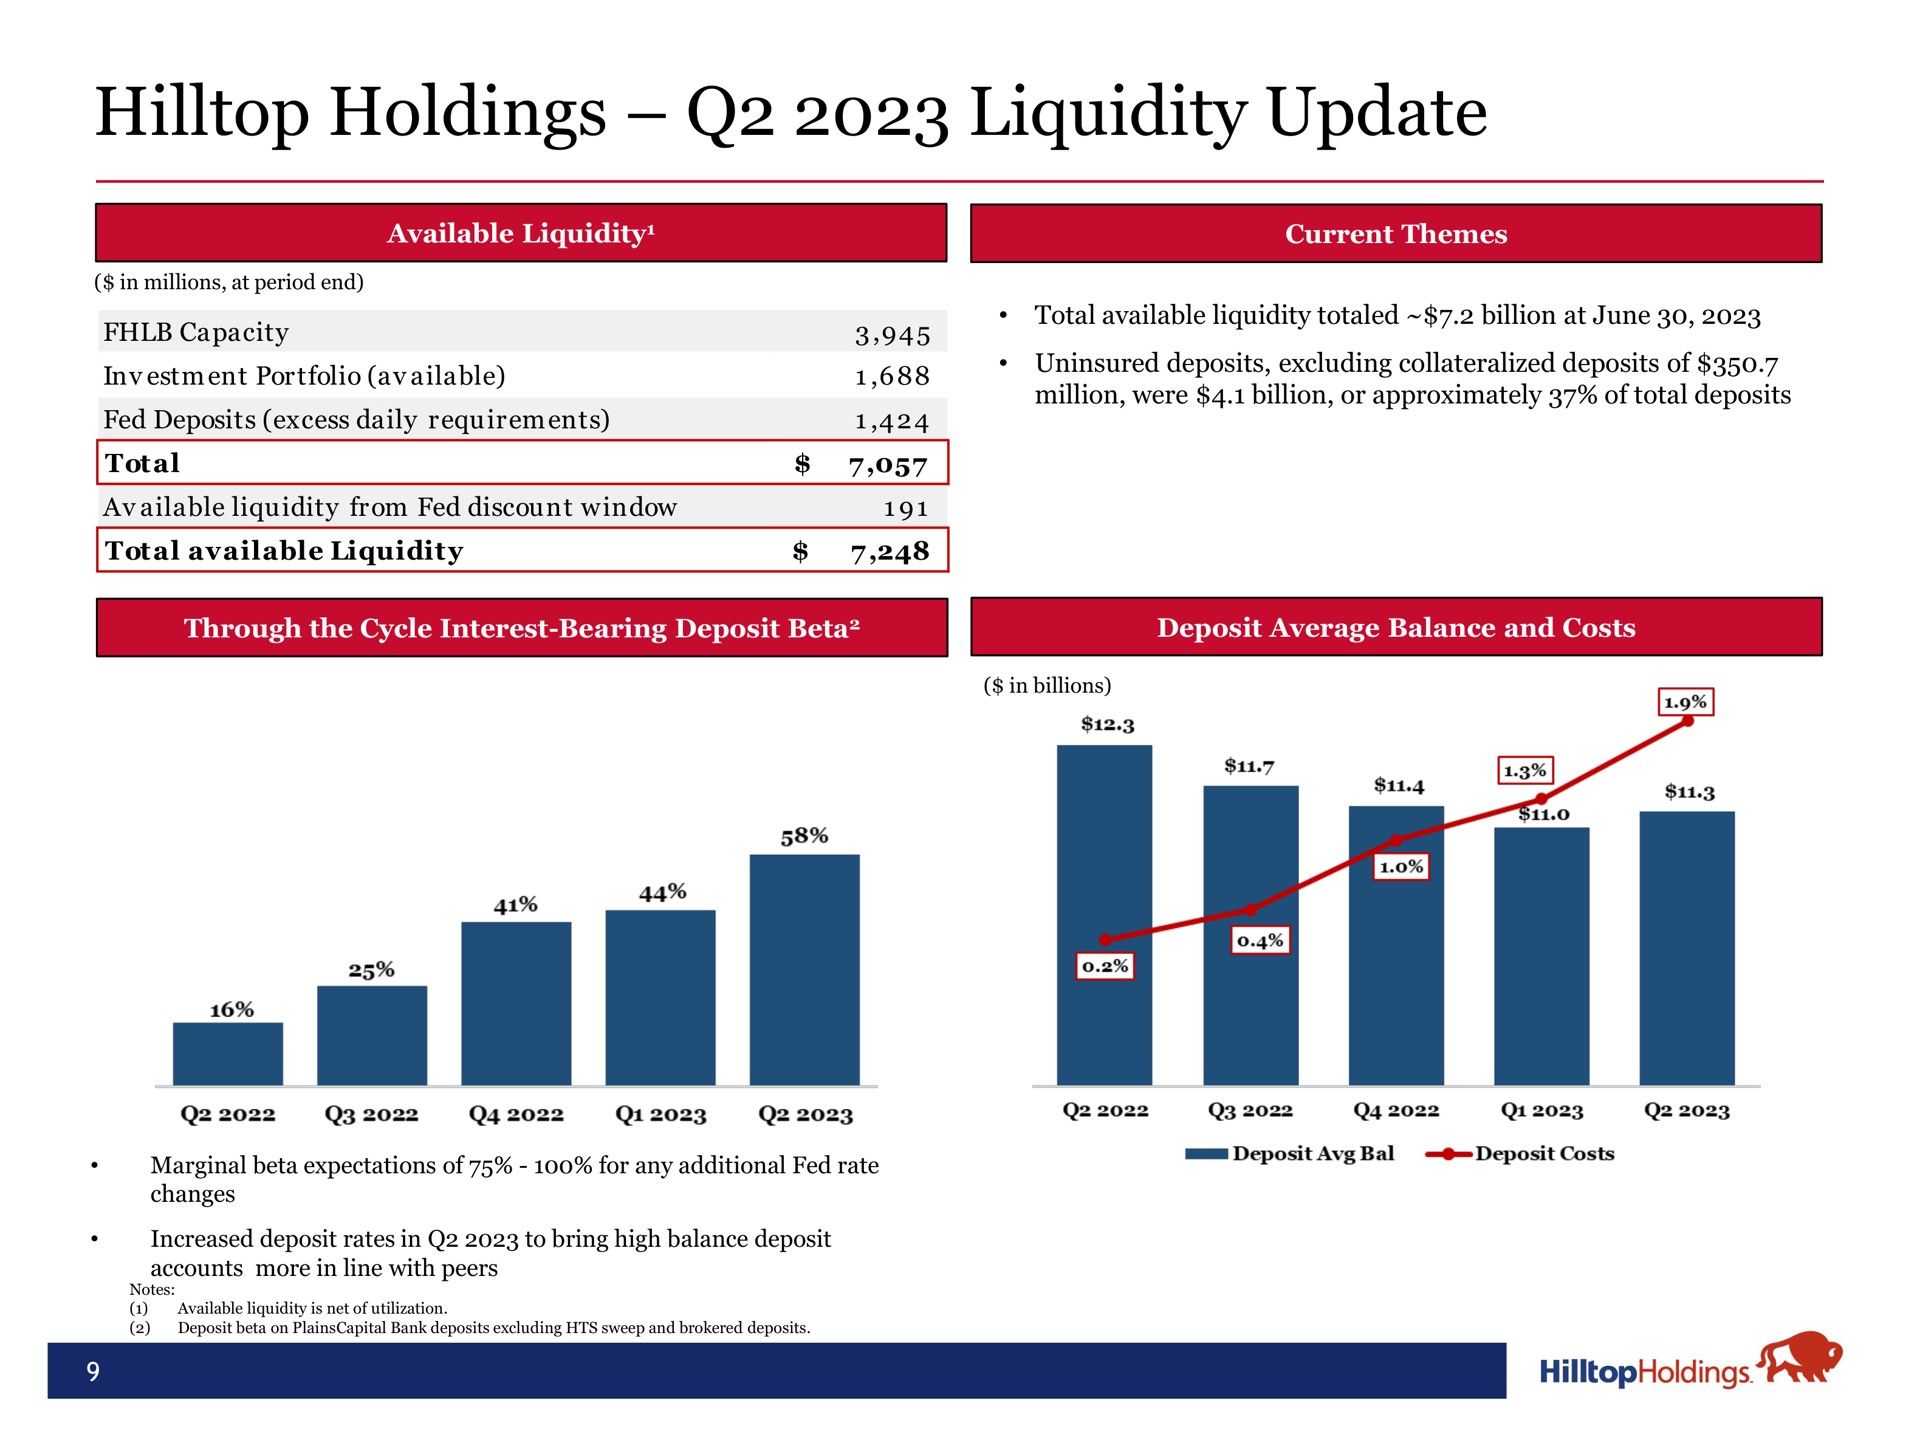 hilltop holdings liquidity update | Hilltop Holdings